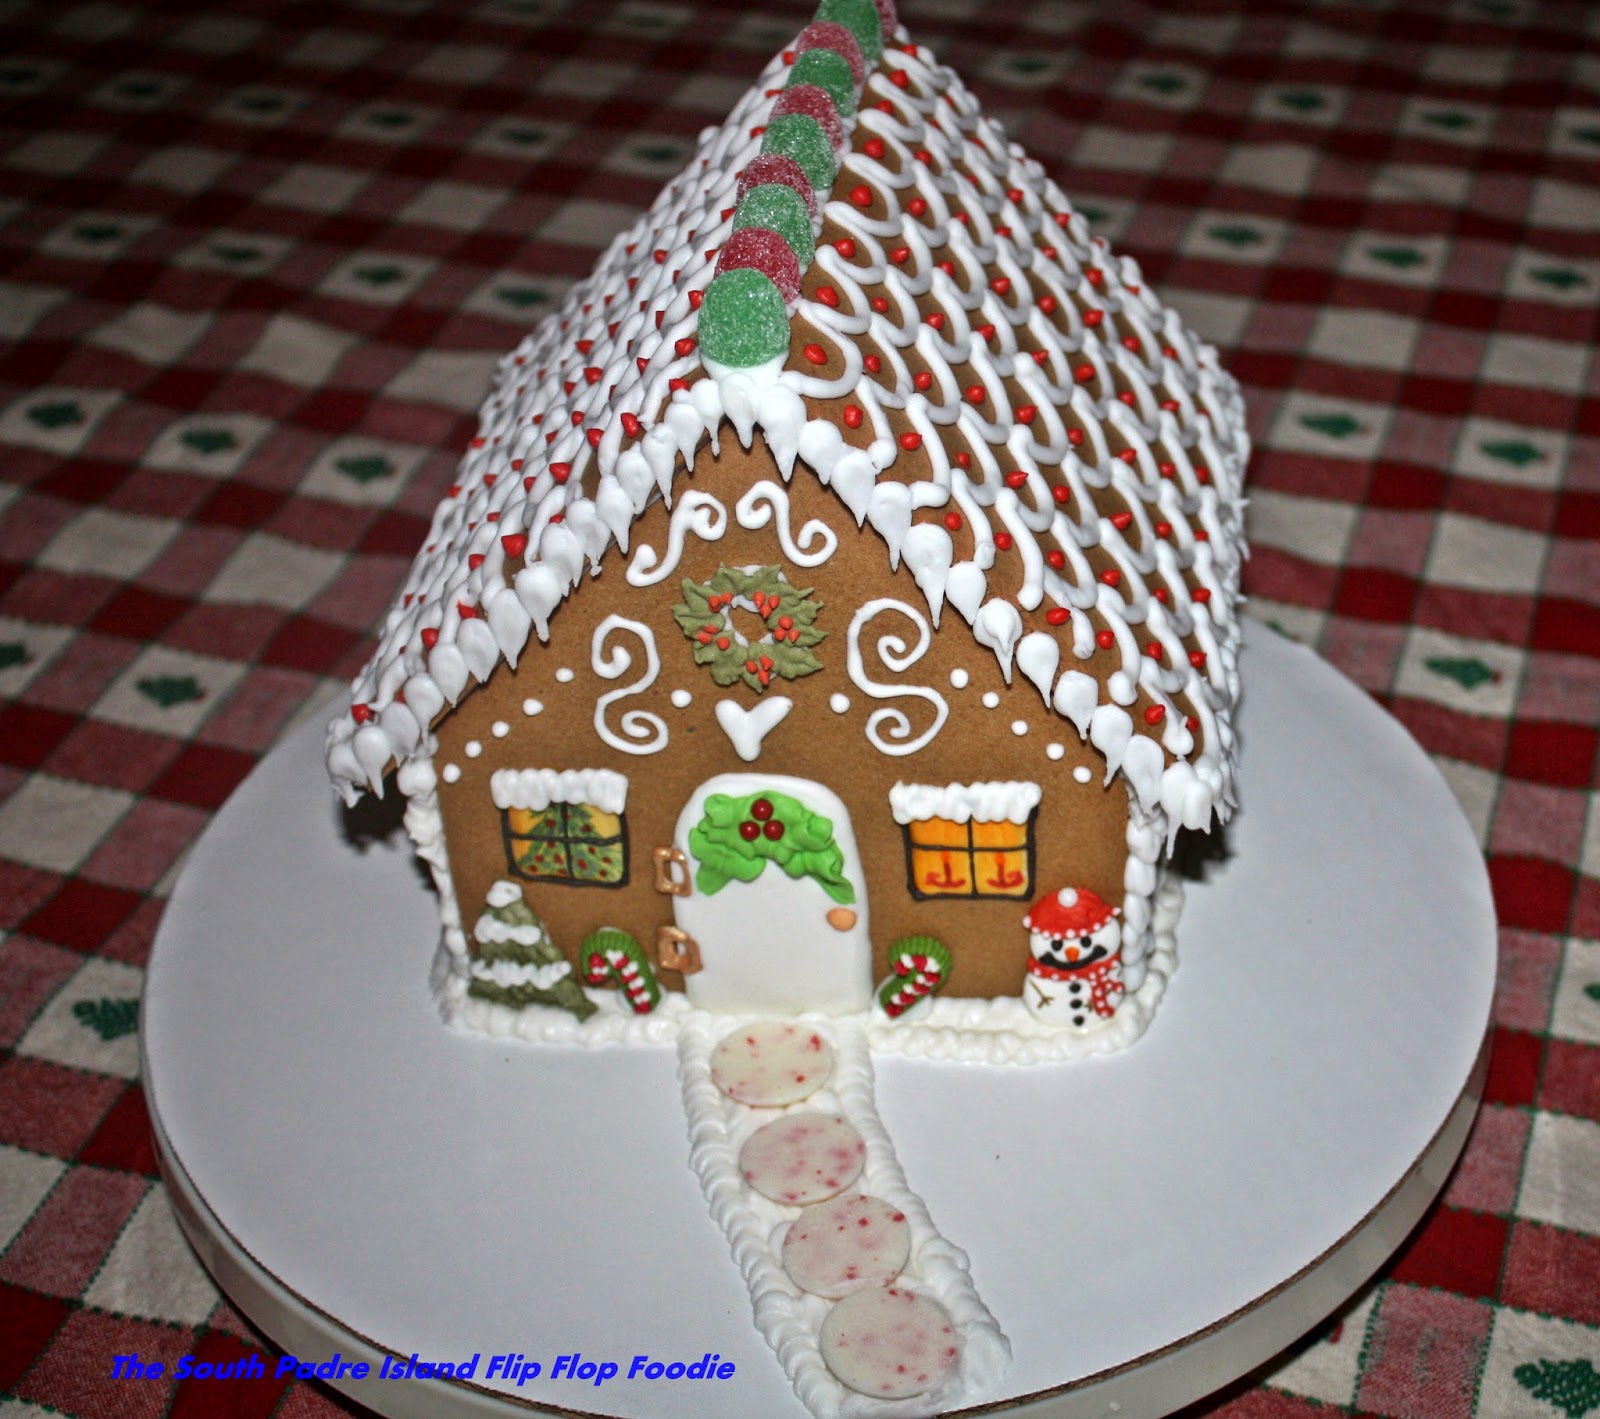 The South Padre Island Flip Flop Foodie: Gingerbread House - My ...